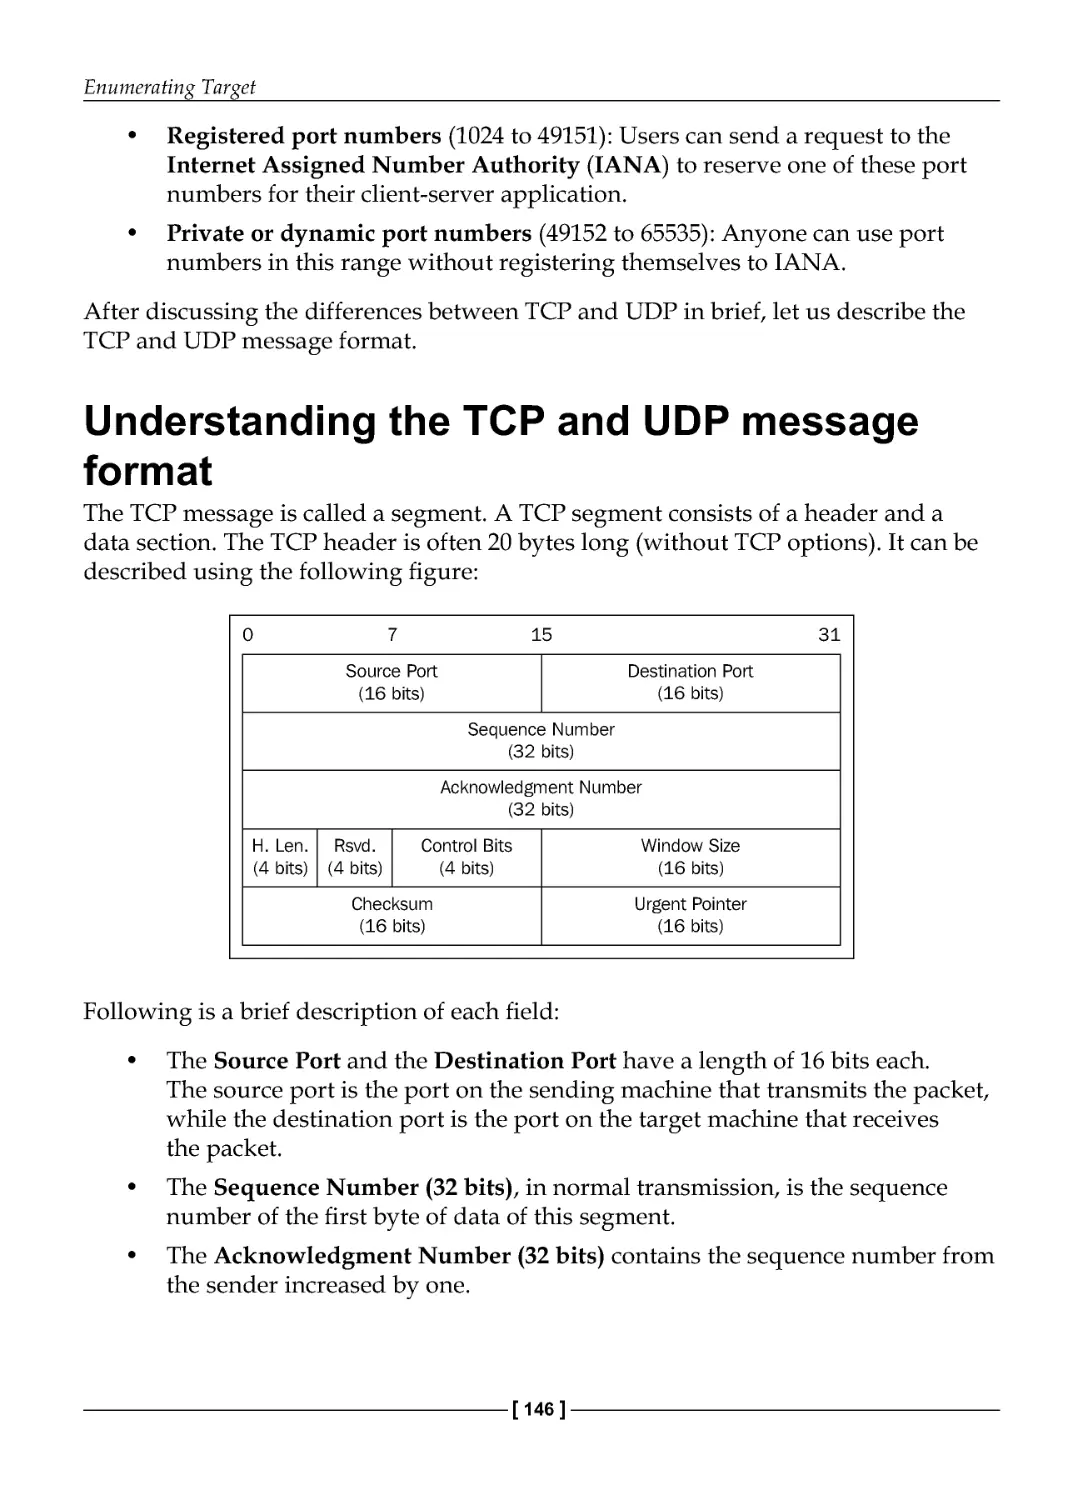 Understanding the TCP and UDP message format